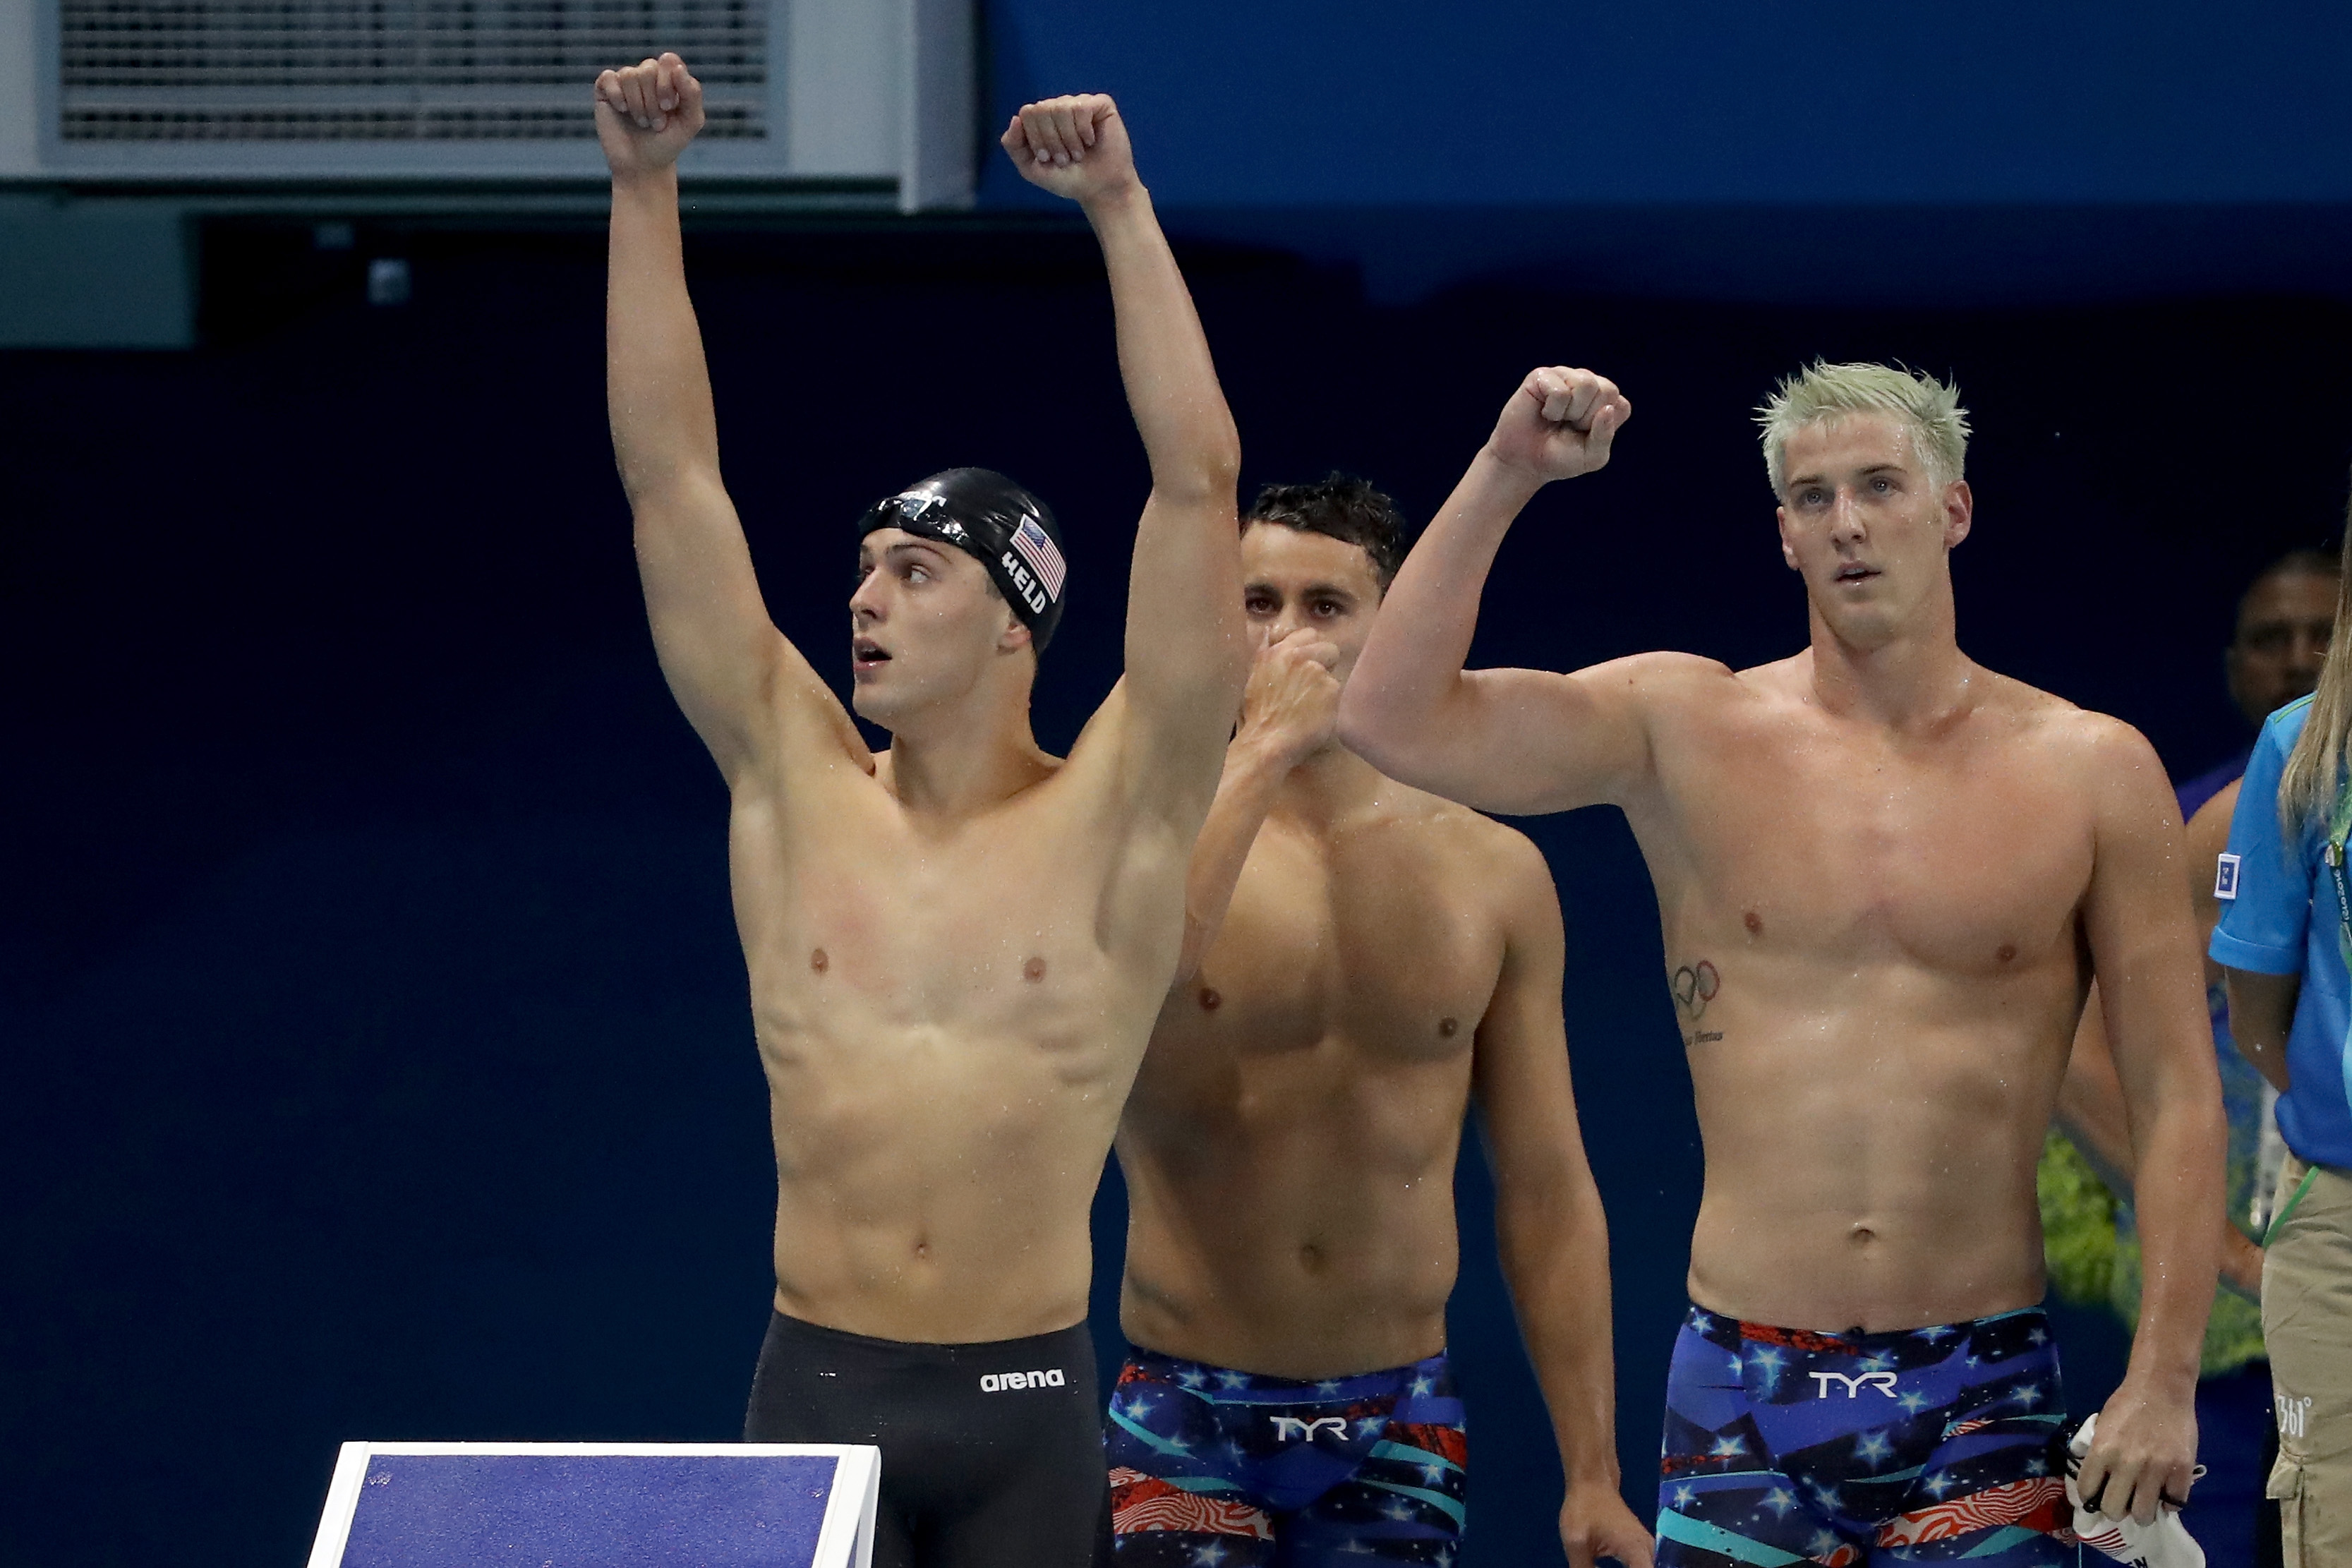 American Olympic swimmer James Feigen (at right) celebrates a relay race win on Day 2 of the Rio 2016 Olympic Games at the Olympic Aquatics Stadium on August 7, 2016 in Rio de Janeiro, Brazil.  (Photo by Al Bello/Getty Images)